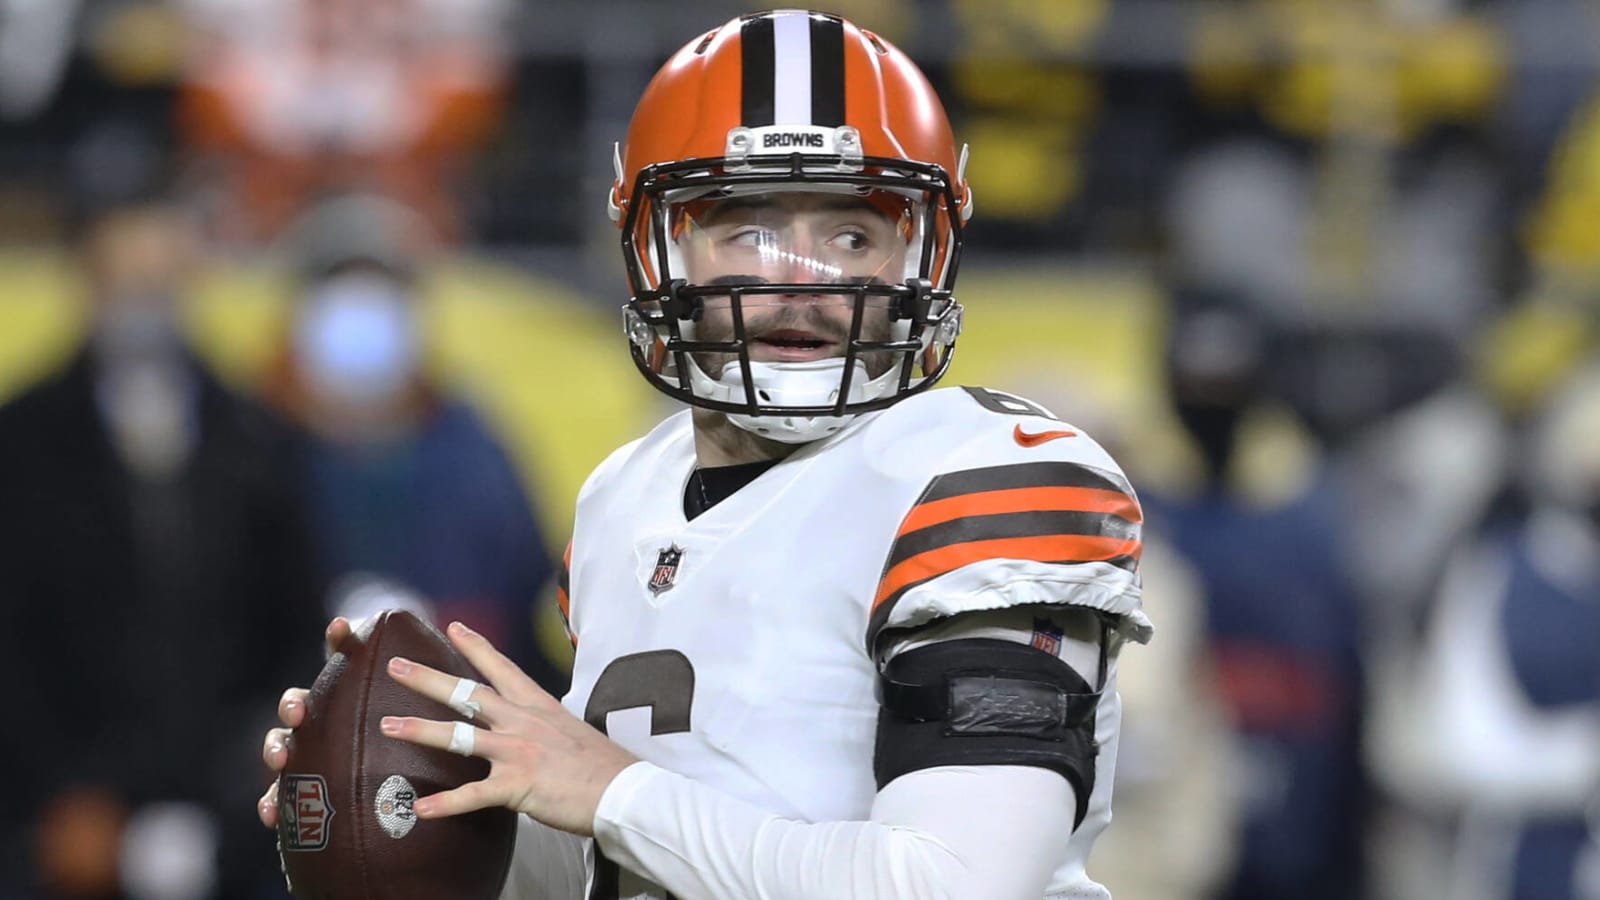 Browns QB Baker Mayfield likely to remain starter in 2022